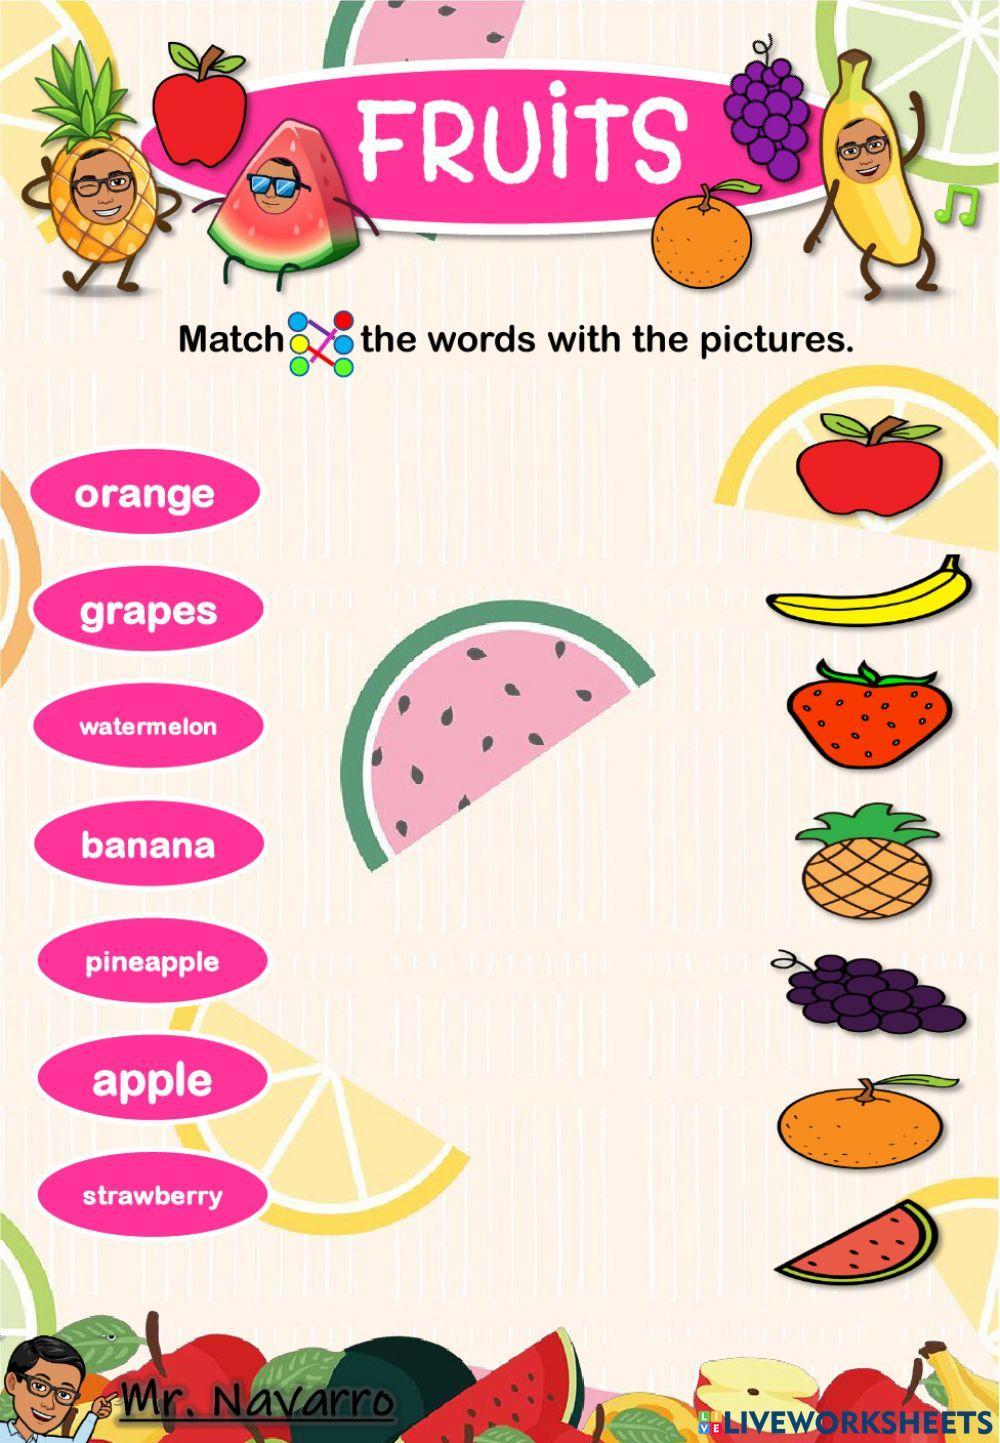 Fruits (Match the words with the pictures)